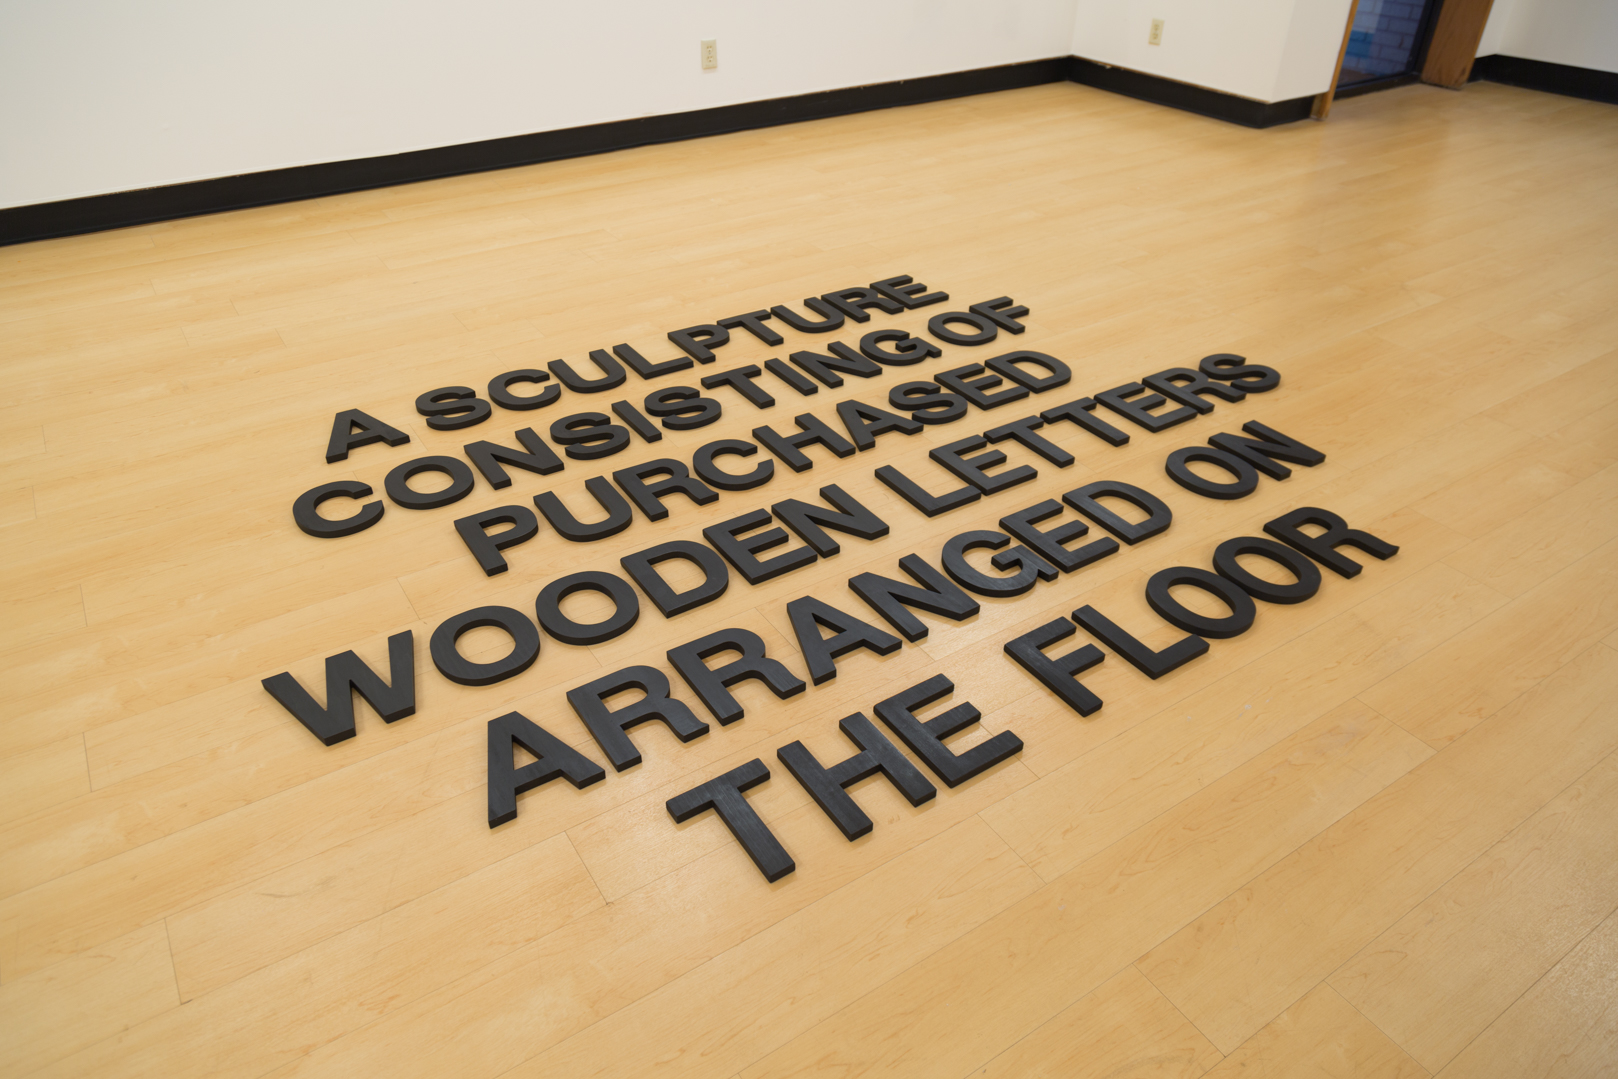    A Sculpture Consisting of Purchased Wooden Letters Arranged on the Floor , 2019  Wood, India ink, and wax Size variable 